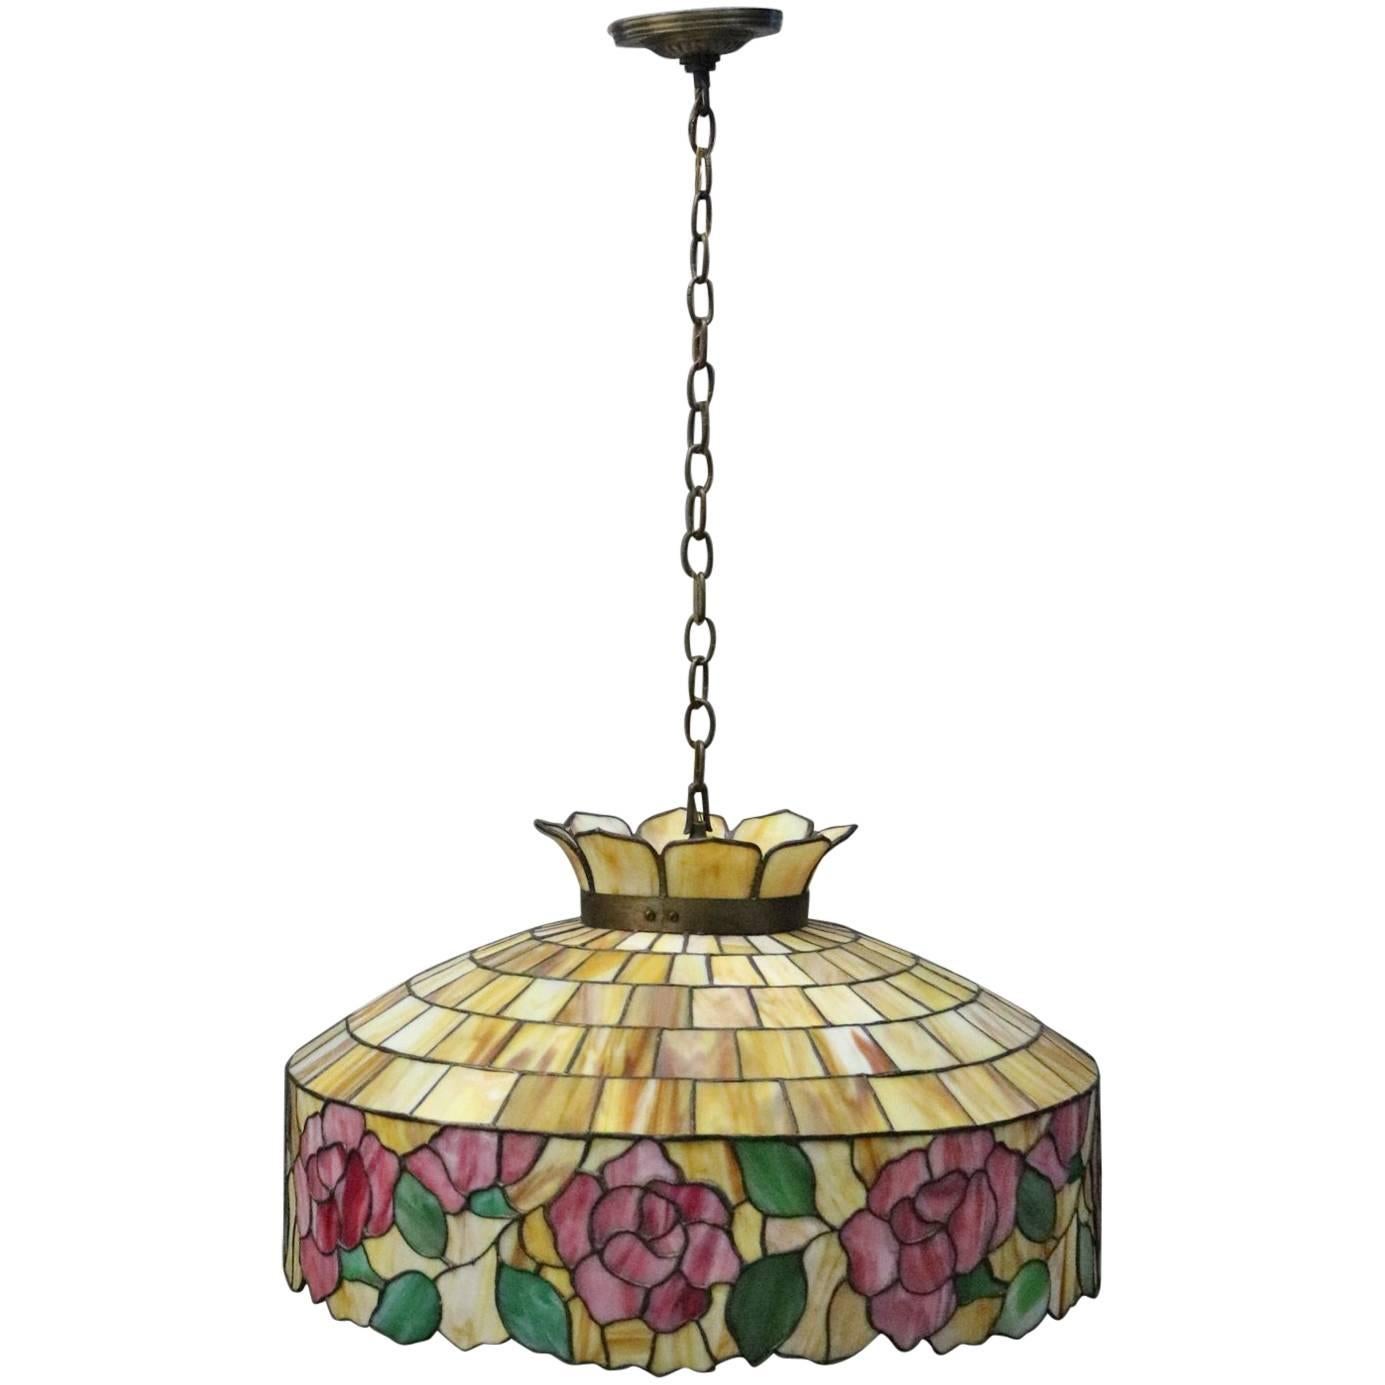 Arts & Crafts Wilkinson School Leaded Stained Glass Chandelier, circa 1920